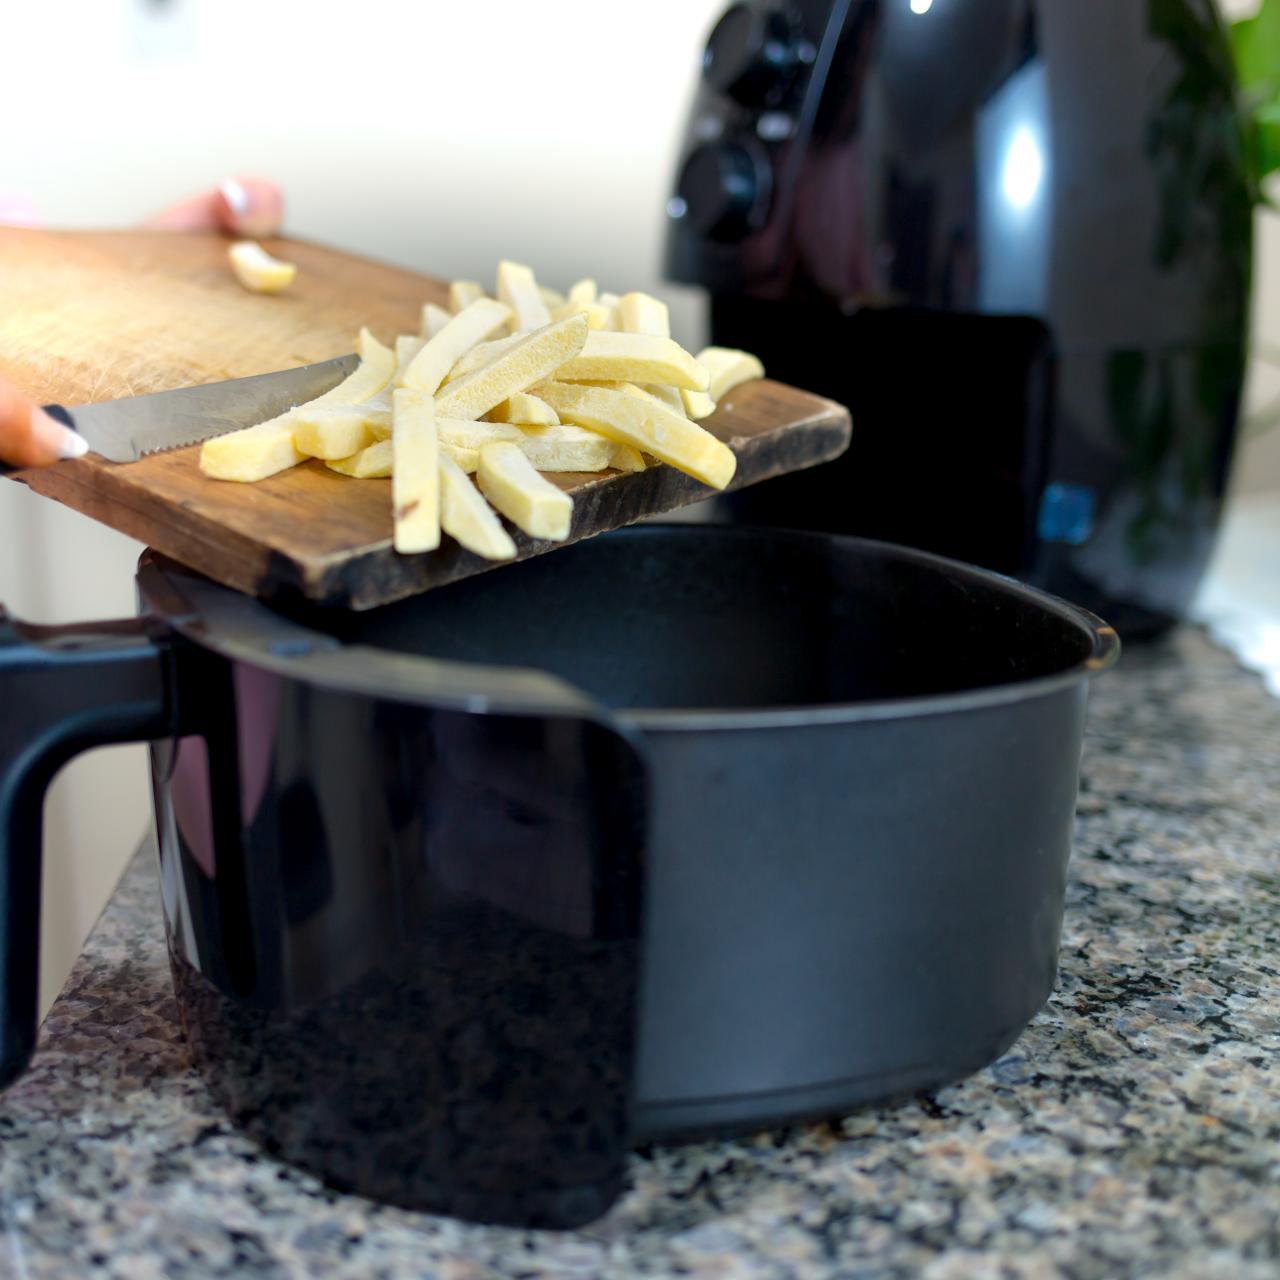 The Best Air Fryer Basket for Oven Use - Also The Crumbs Please